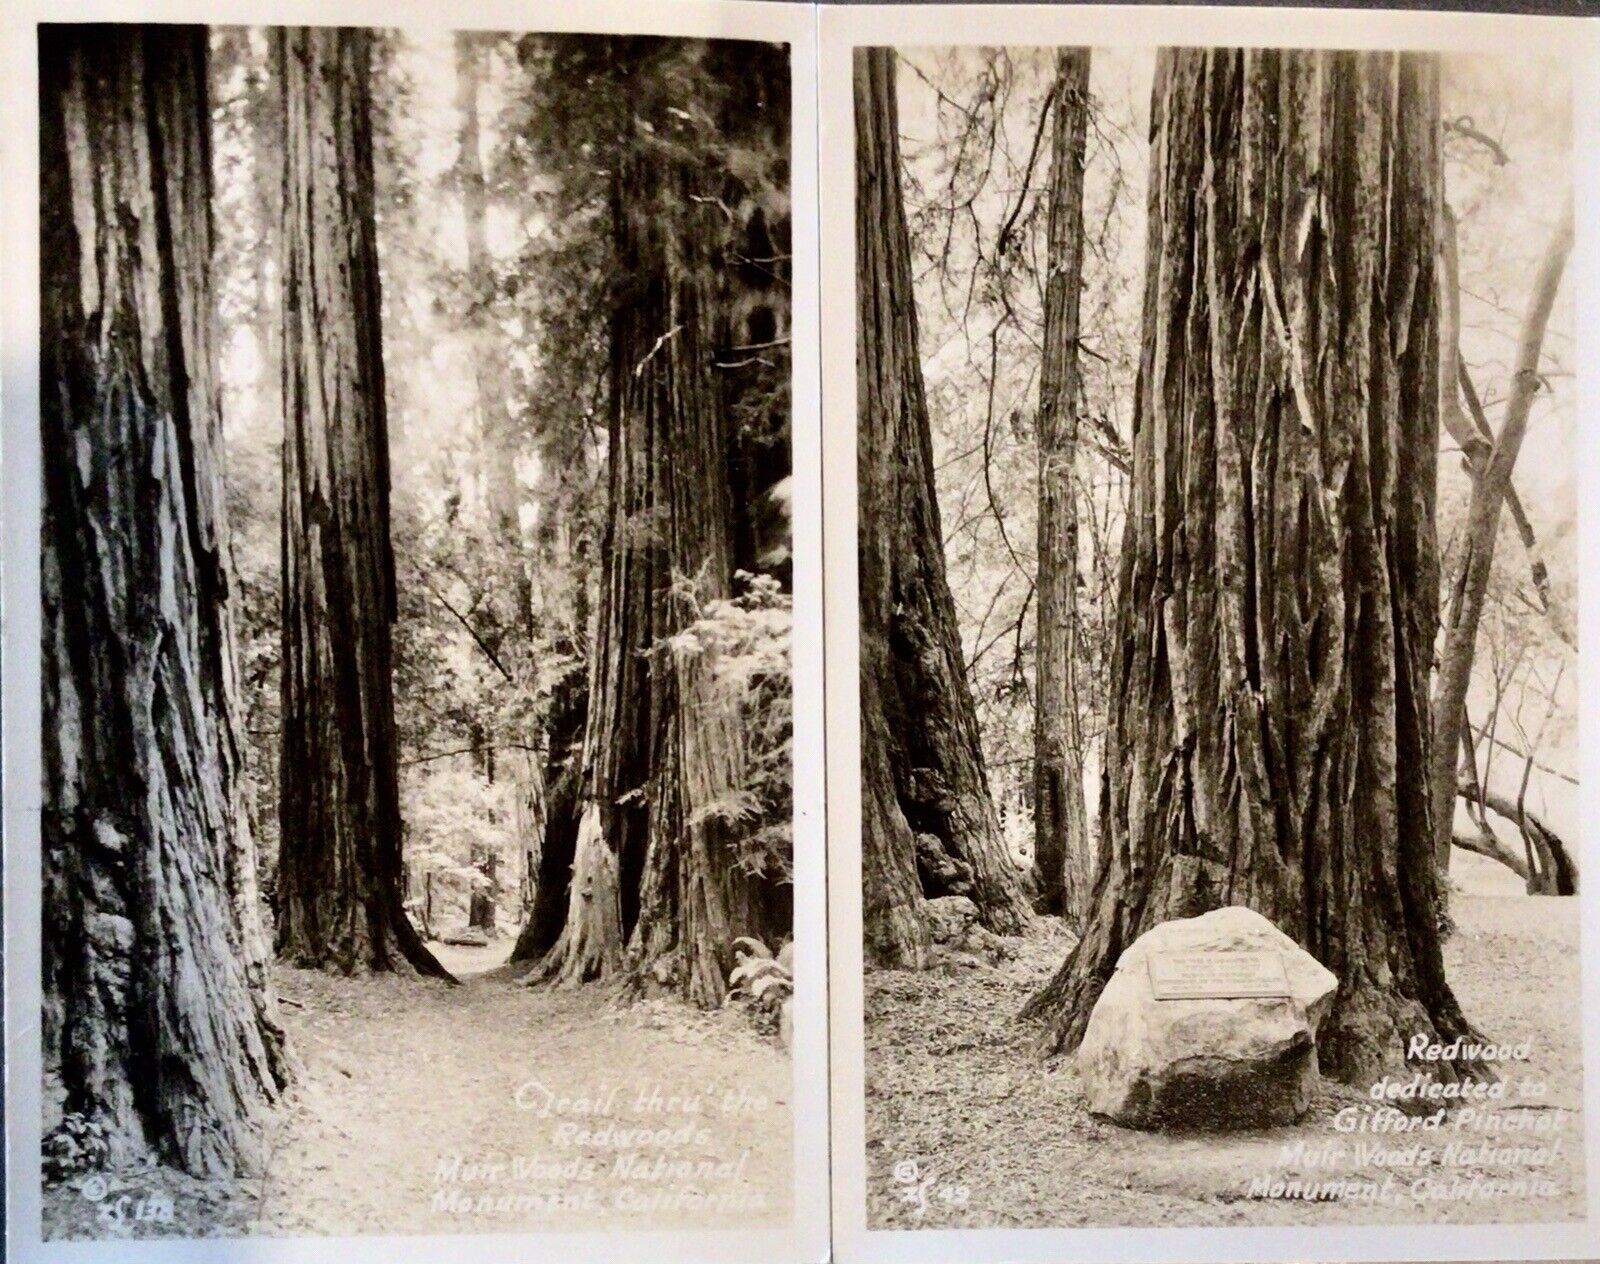 ZAN STARK Photo Postcards  Very Collectible  Lot Of 2 RPPC Muir Woods Excellent